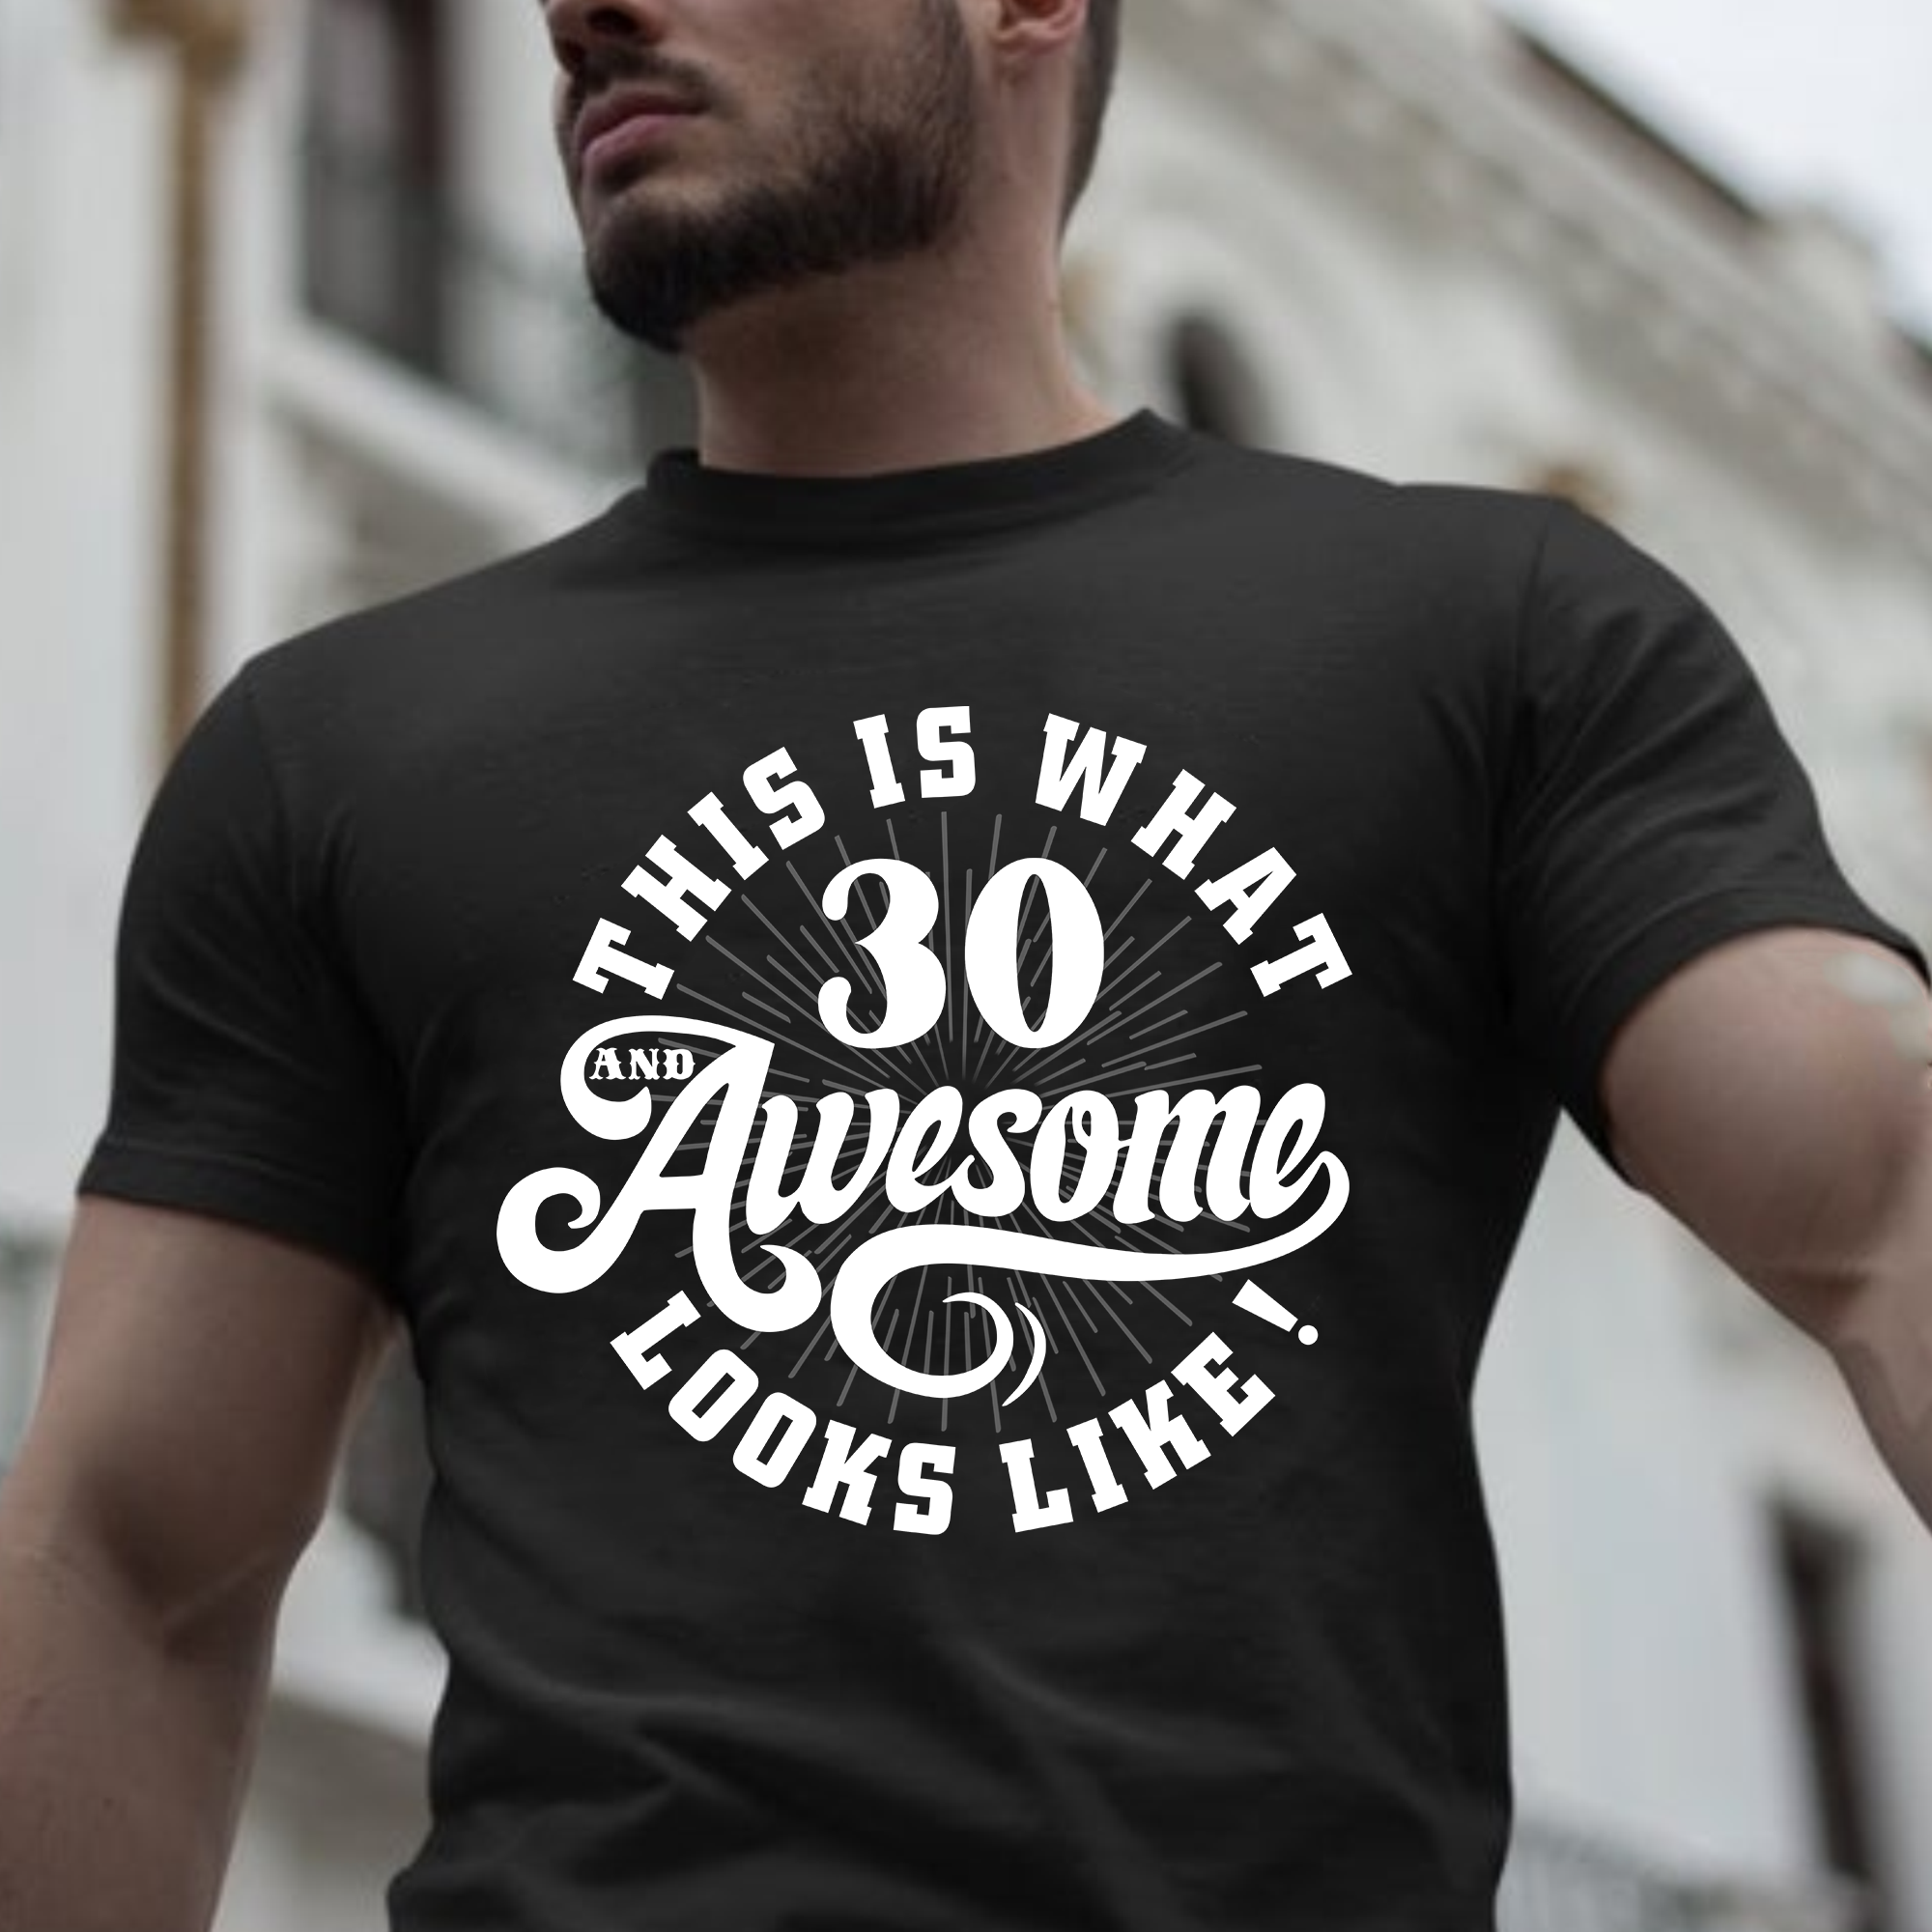 This Is What 30 Awesome Looks Like – Happy 30th Birthday Shirt